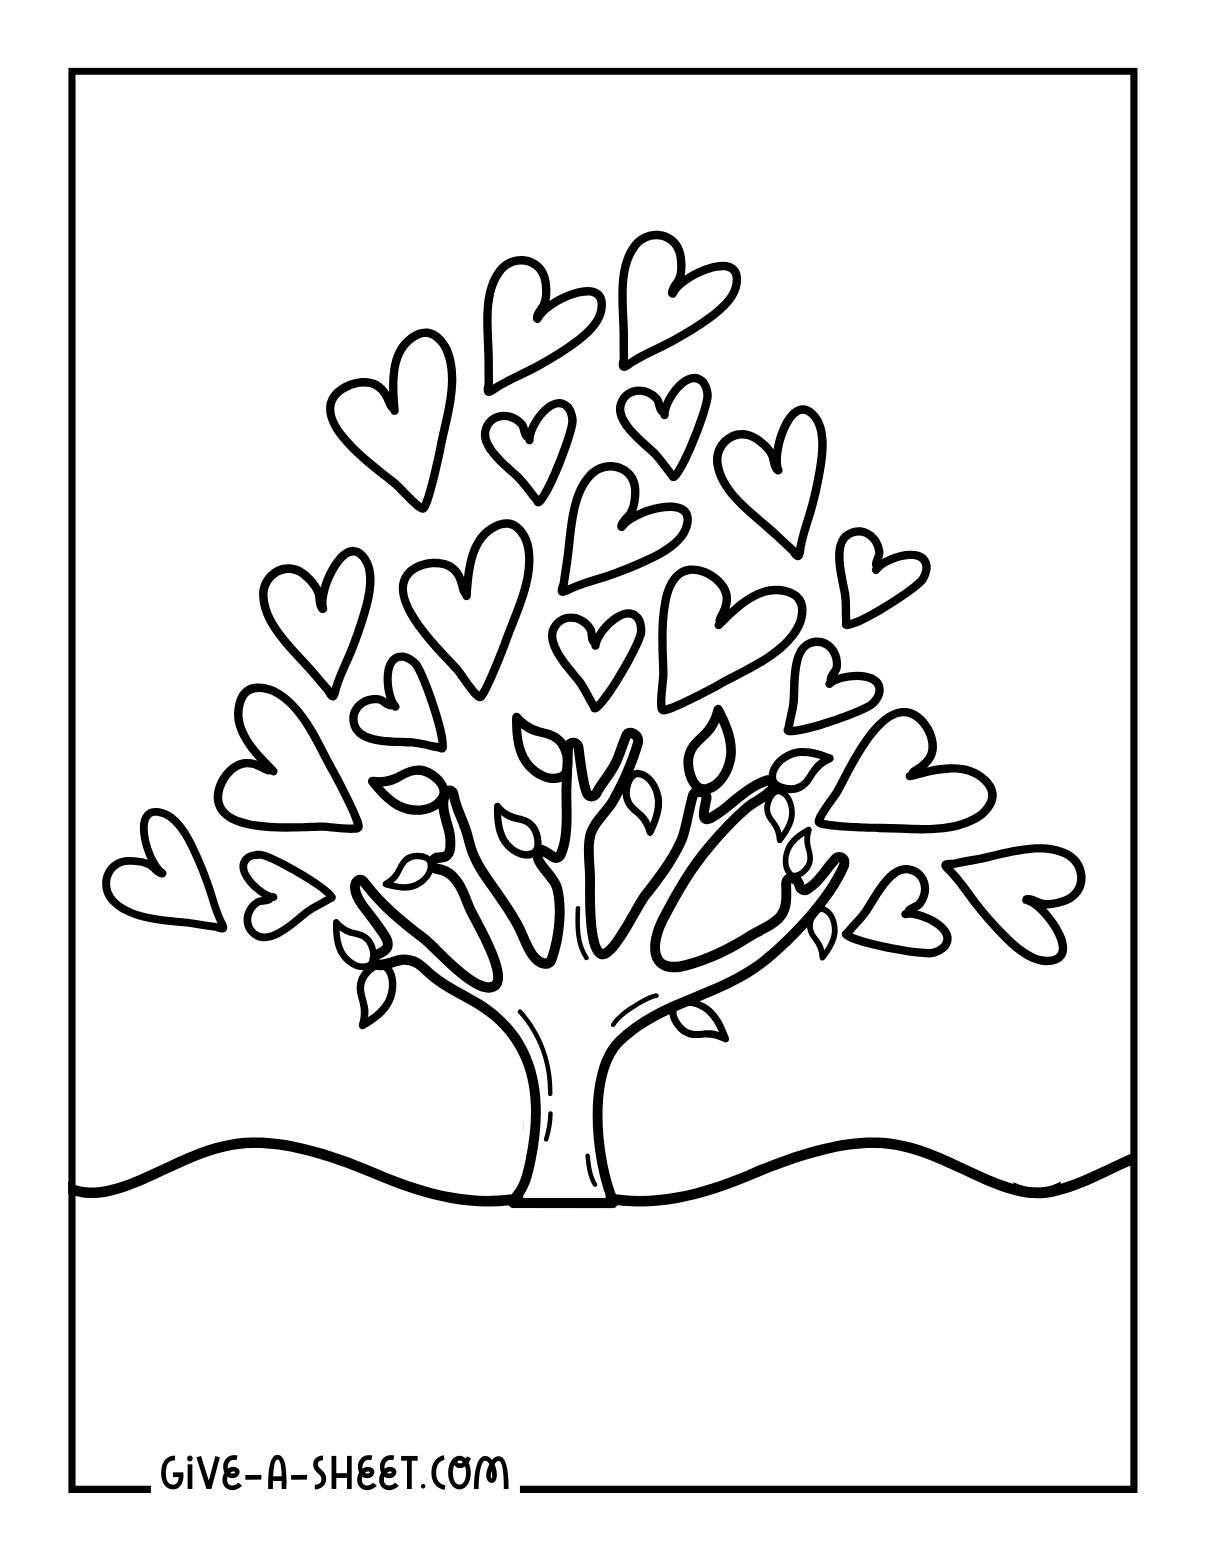 Unique tree of life hearts coloring sheet for kids.